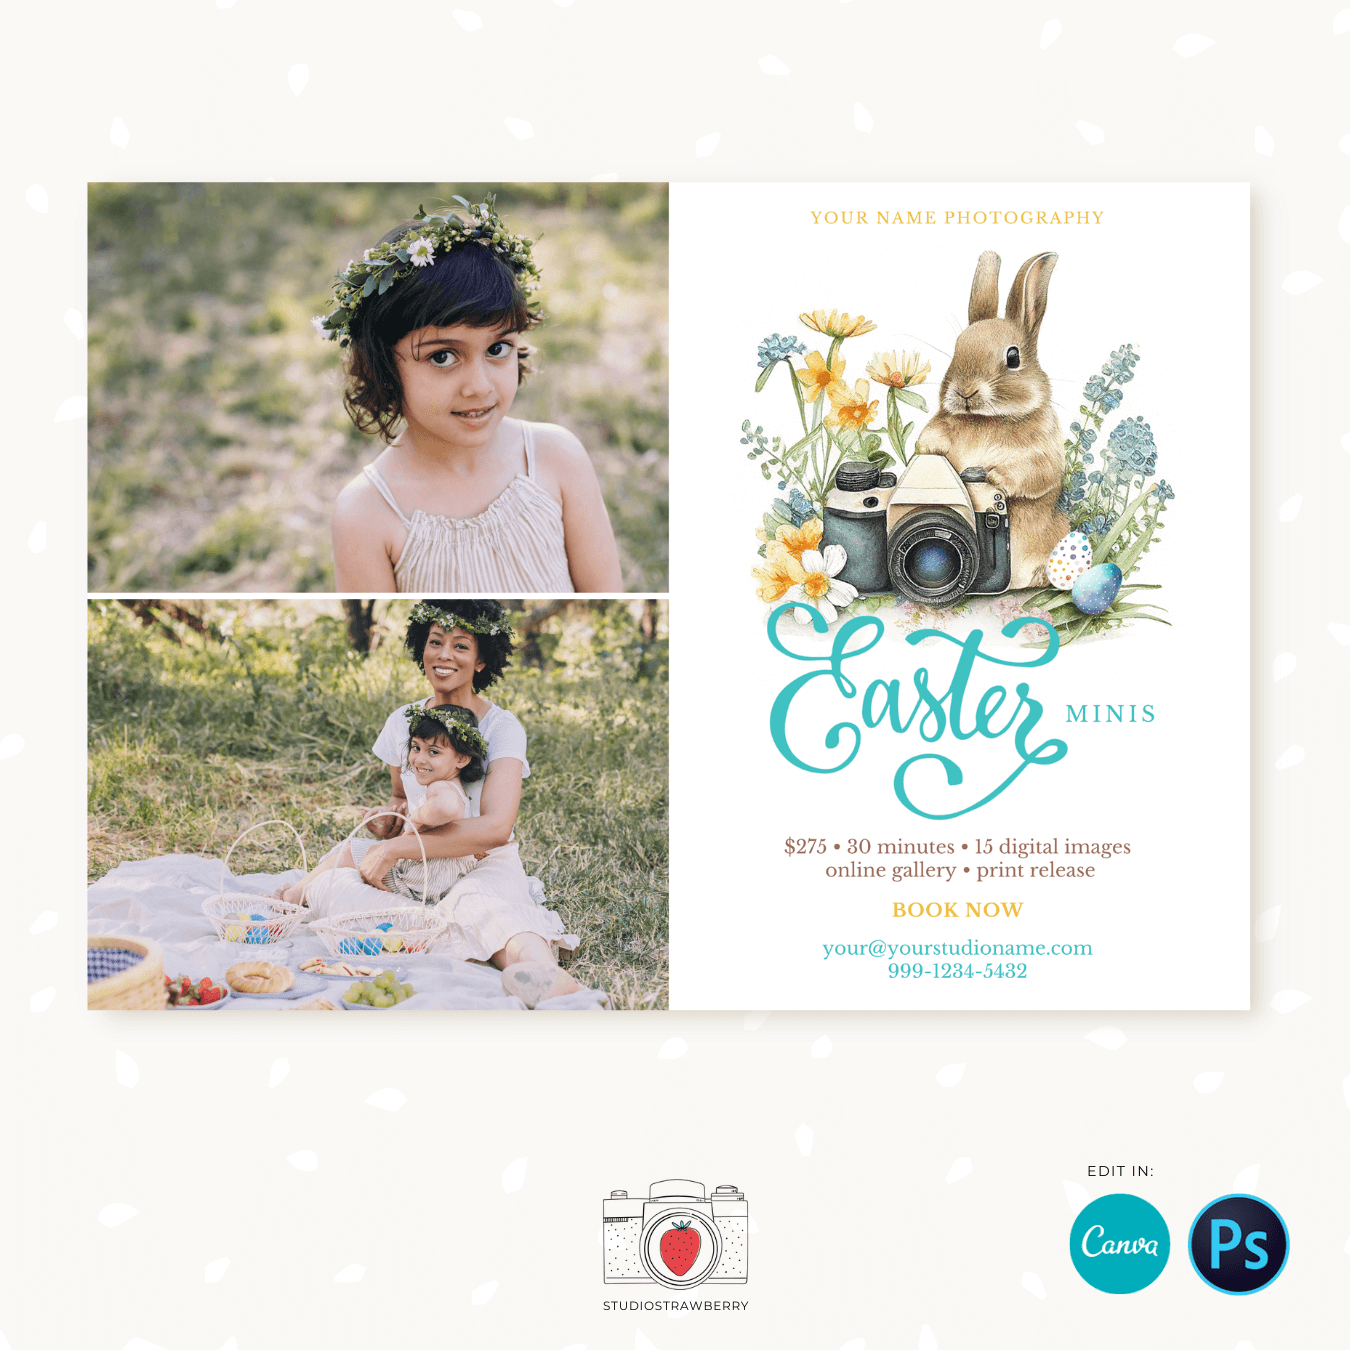 Easter mini sessions marketing template